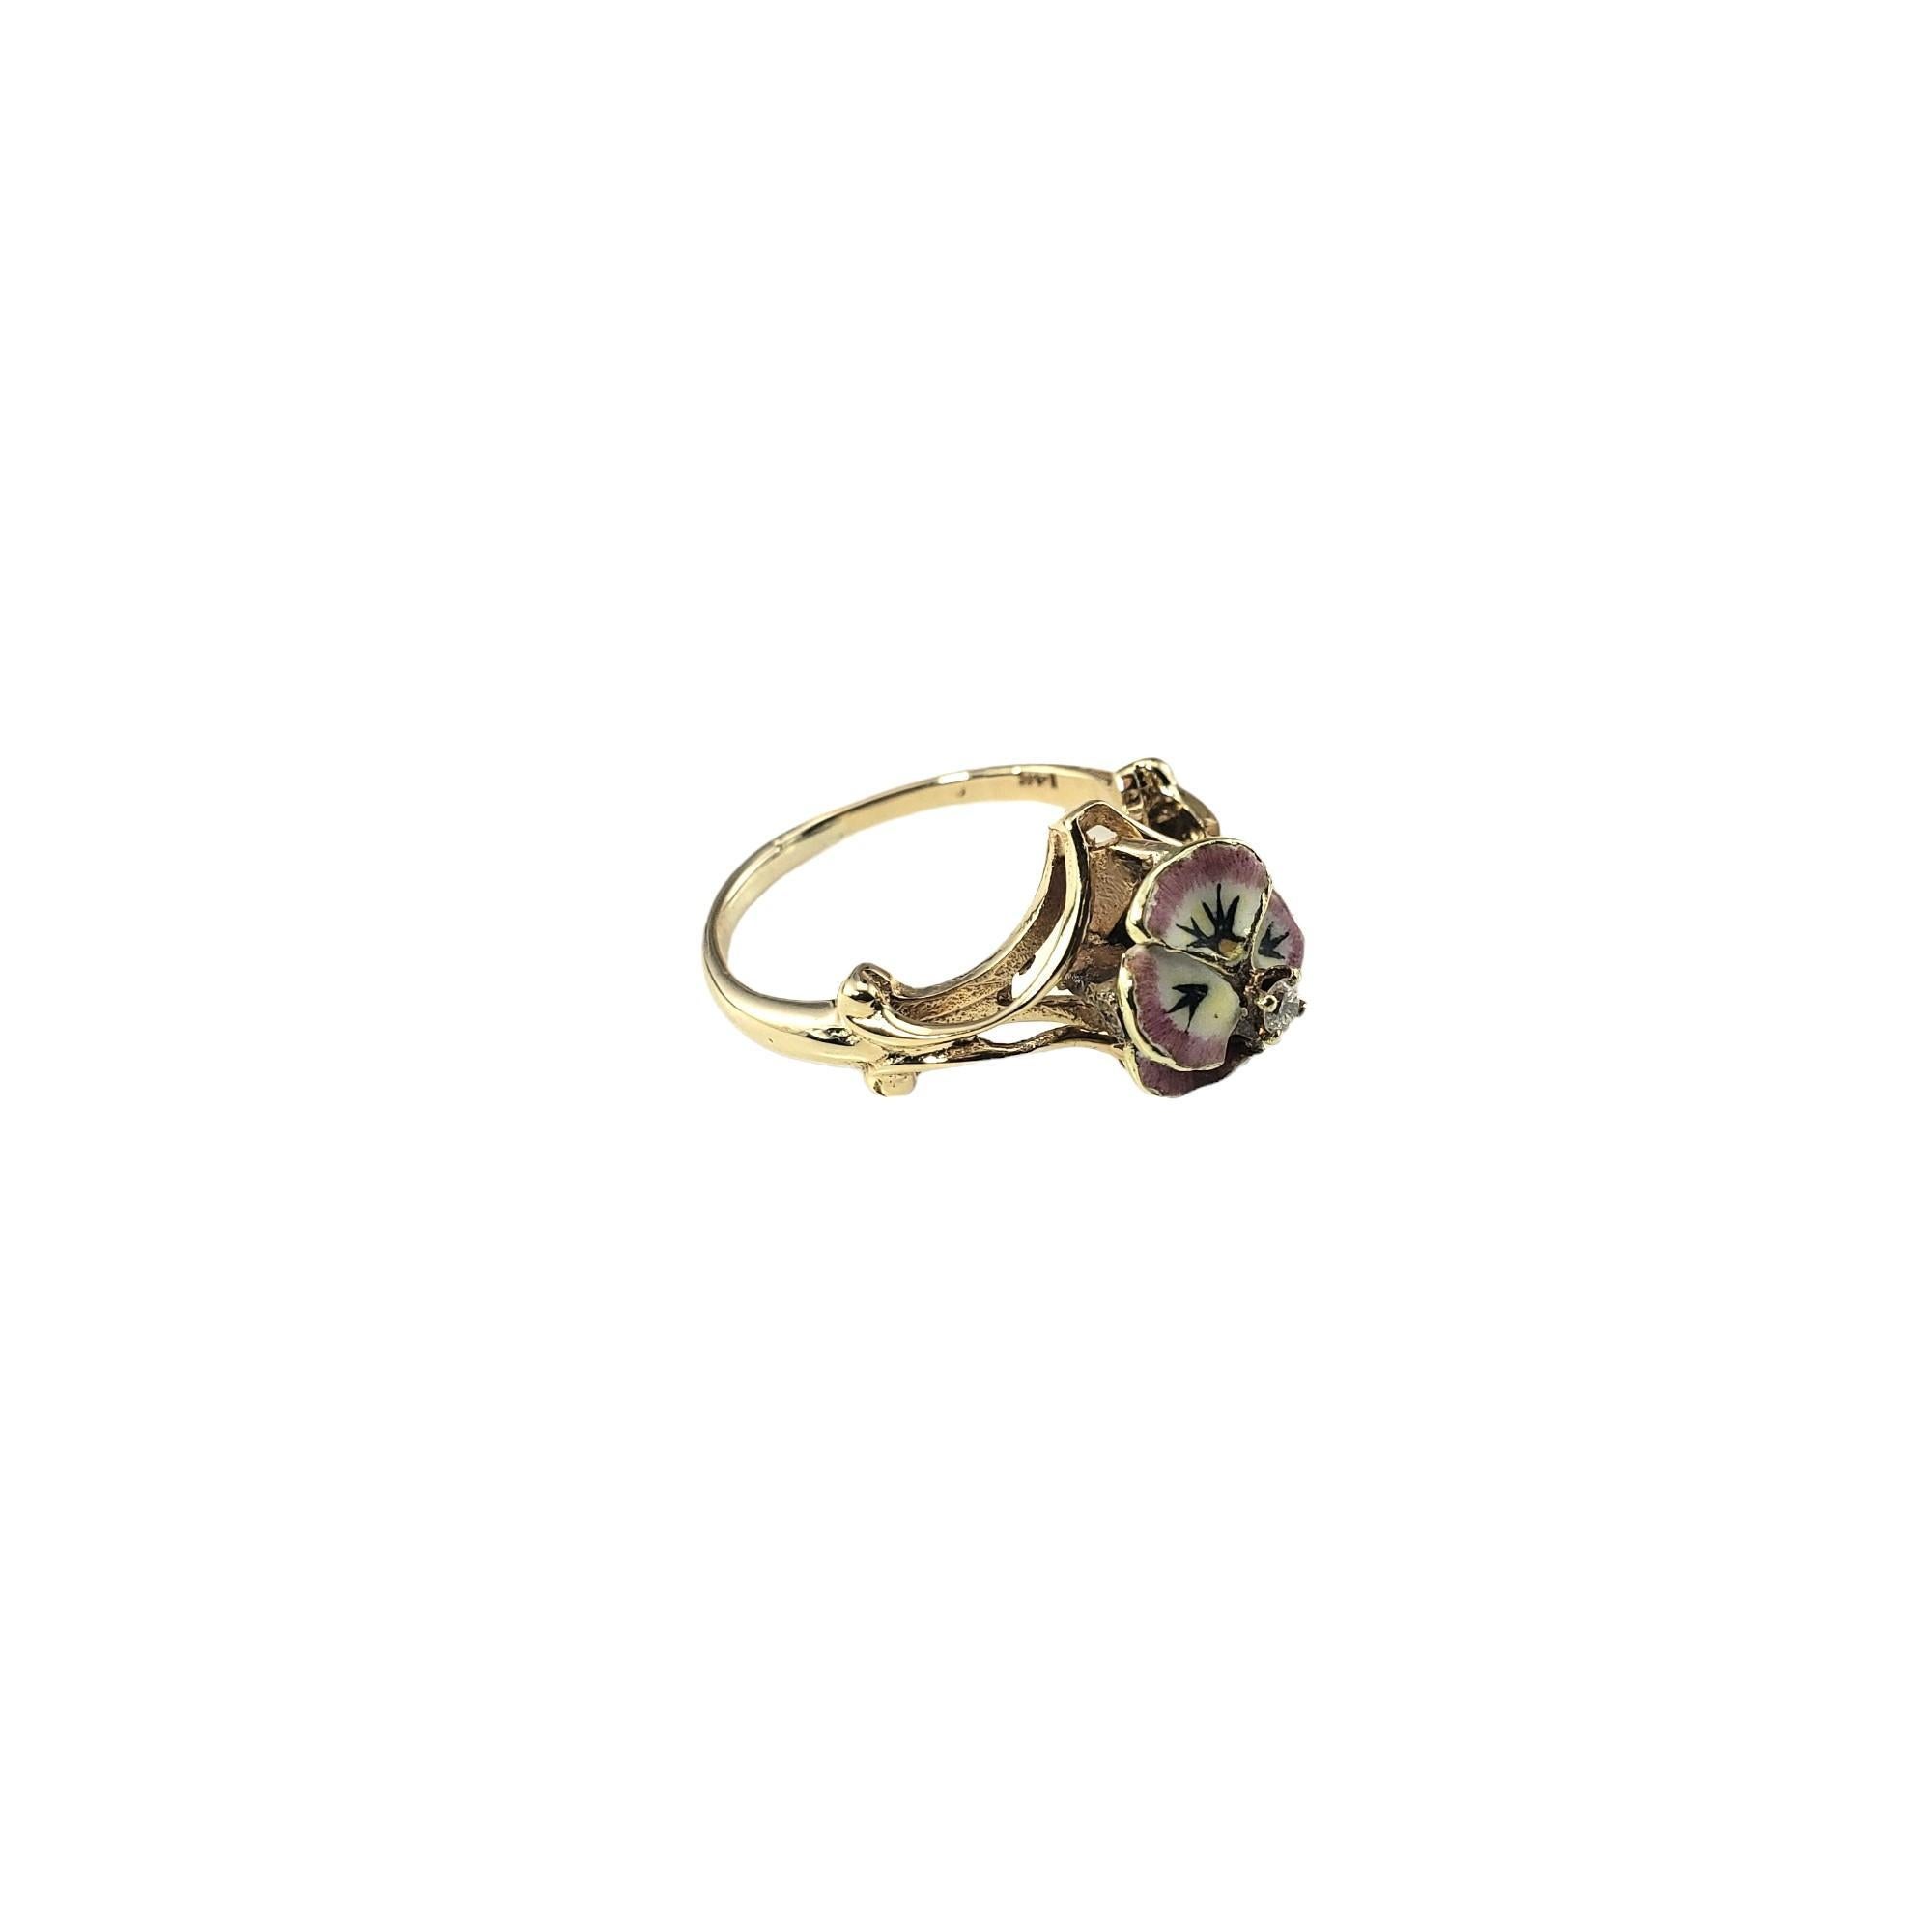 14 Karat Yellow Gold and Diamond Enamel Floral Ring Size 5.75 #15691 In Good Condition For Sale In Washington Depot, CT